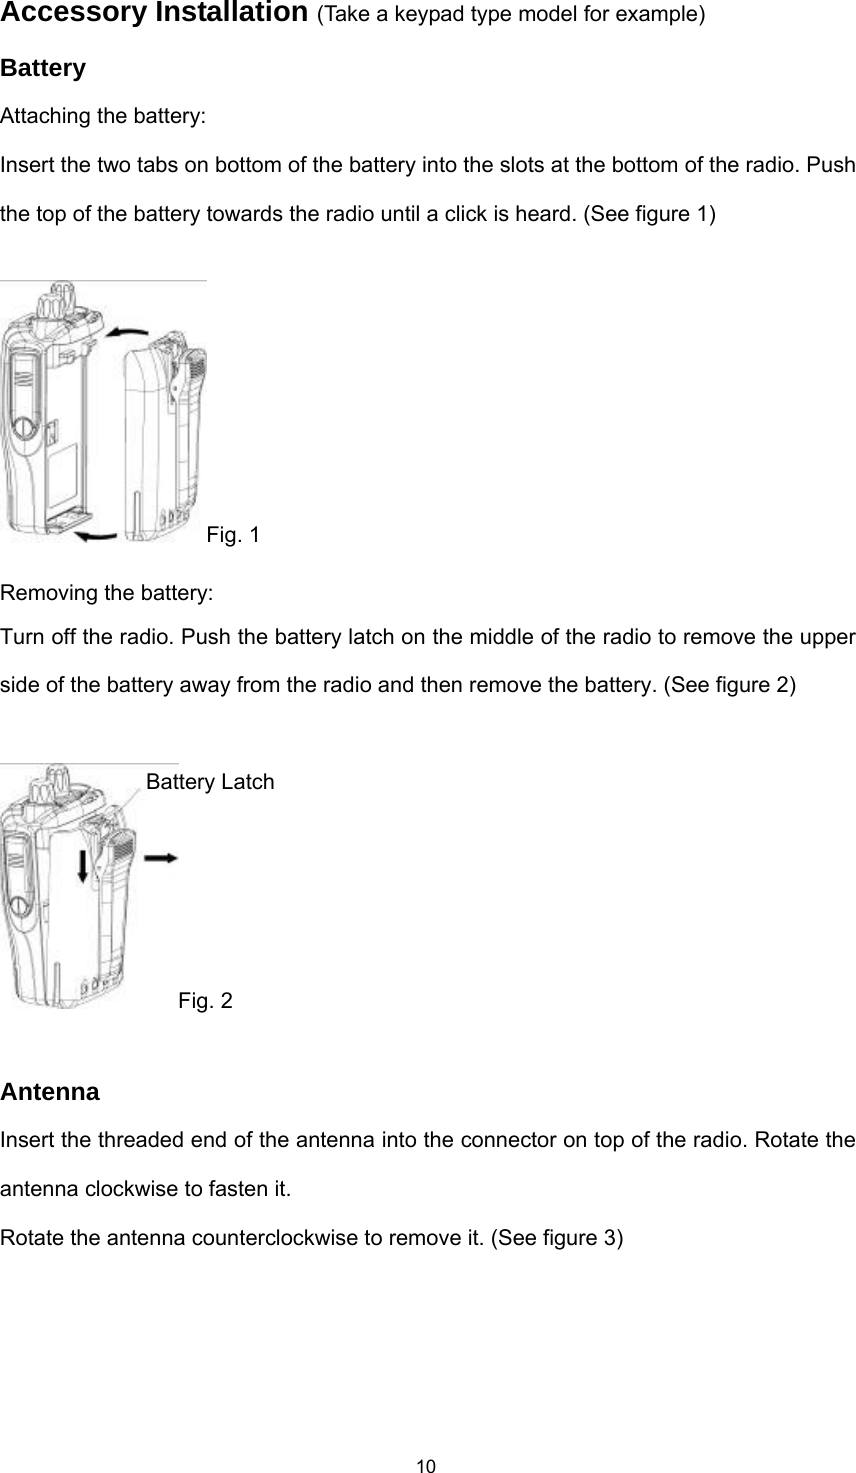  10Accessory Installation (Take a keypad type model for example) Battery Attaching the battery: Insert the two tabs on bottom of the battery into the slots at the bottom of the radio. Push the top of the battery towards the radio until a click is heard. (See figure 1) Fig. 1 Removing the battery: Turn off the radio. Push the battery latch on the middle of the radio to remove the upper side of the battery away from the radio and then remove the battery. (See figure 2)  Fig. 2  Antenna Insert the threaded end of the antenna into the connector on top of the radio. Rotate the antenna clockwise to fasten it. Rotate the antenna counterclockwise to remove it. (See figure 3) Battery Latch 